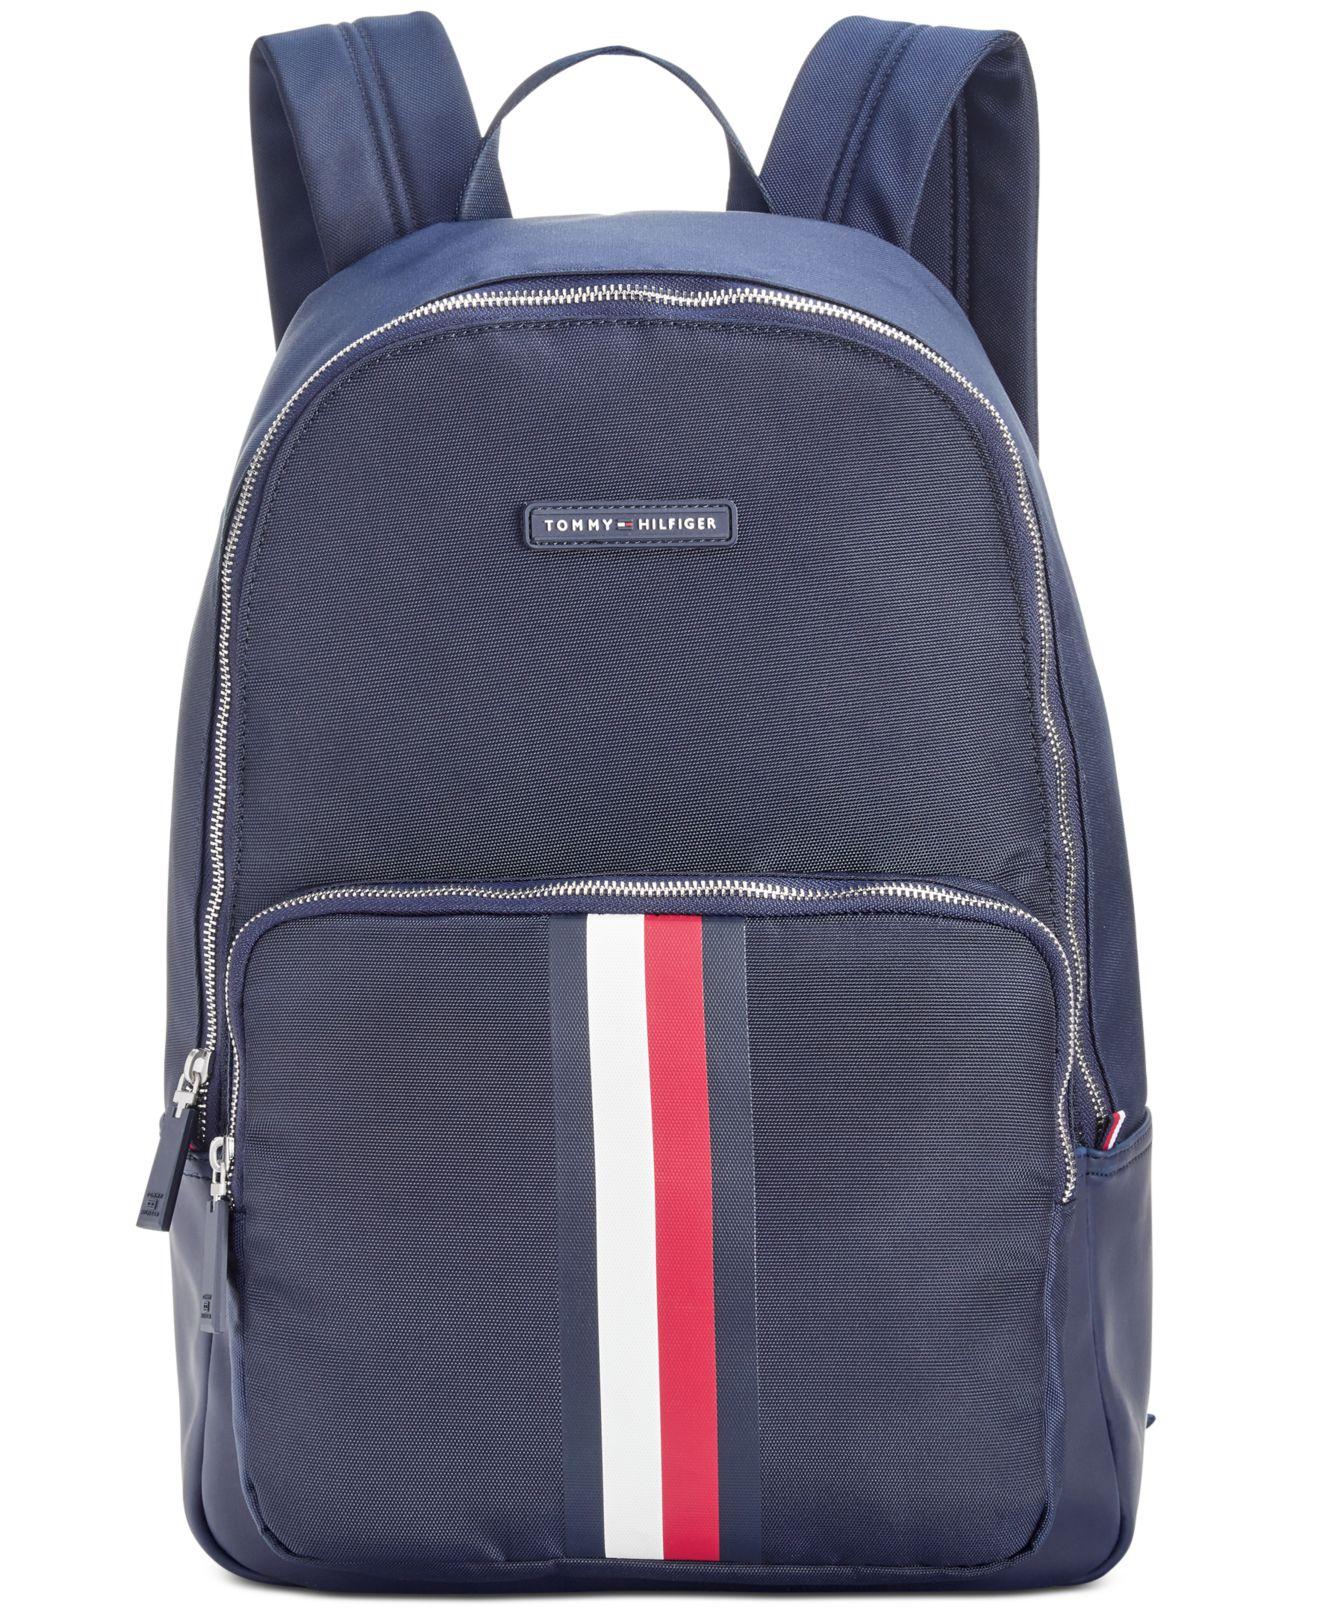 Tommy Hilfiger Synthetic Jonathan Logo Backpack in Blue for Men - Lyst